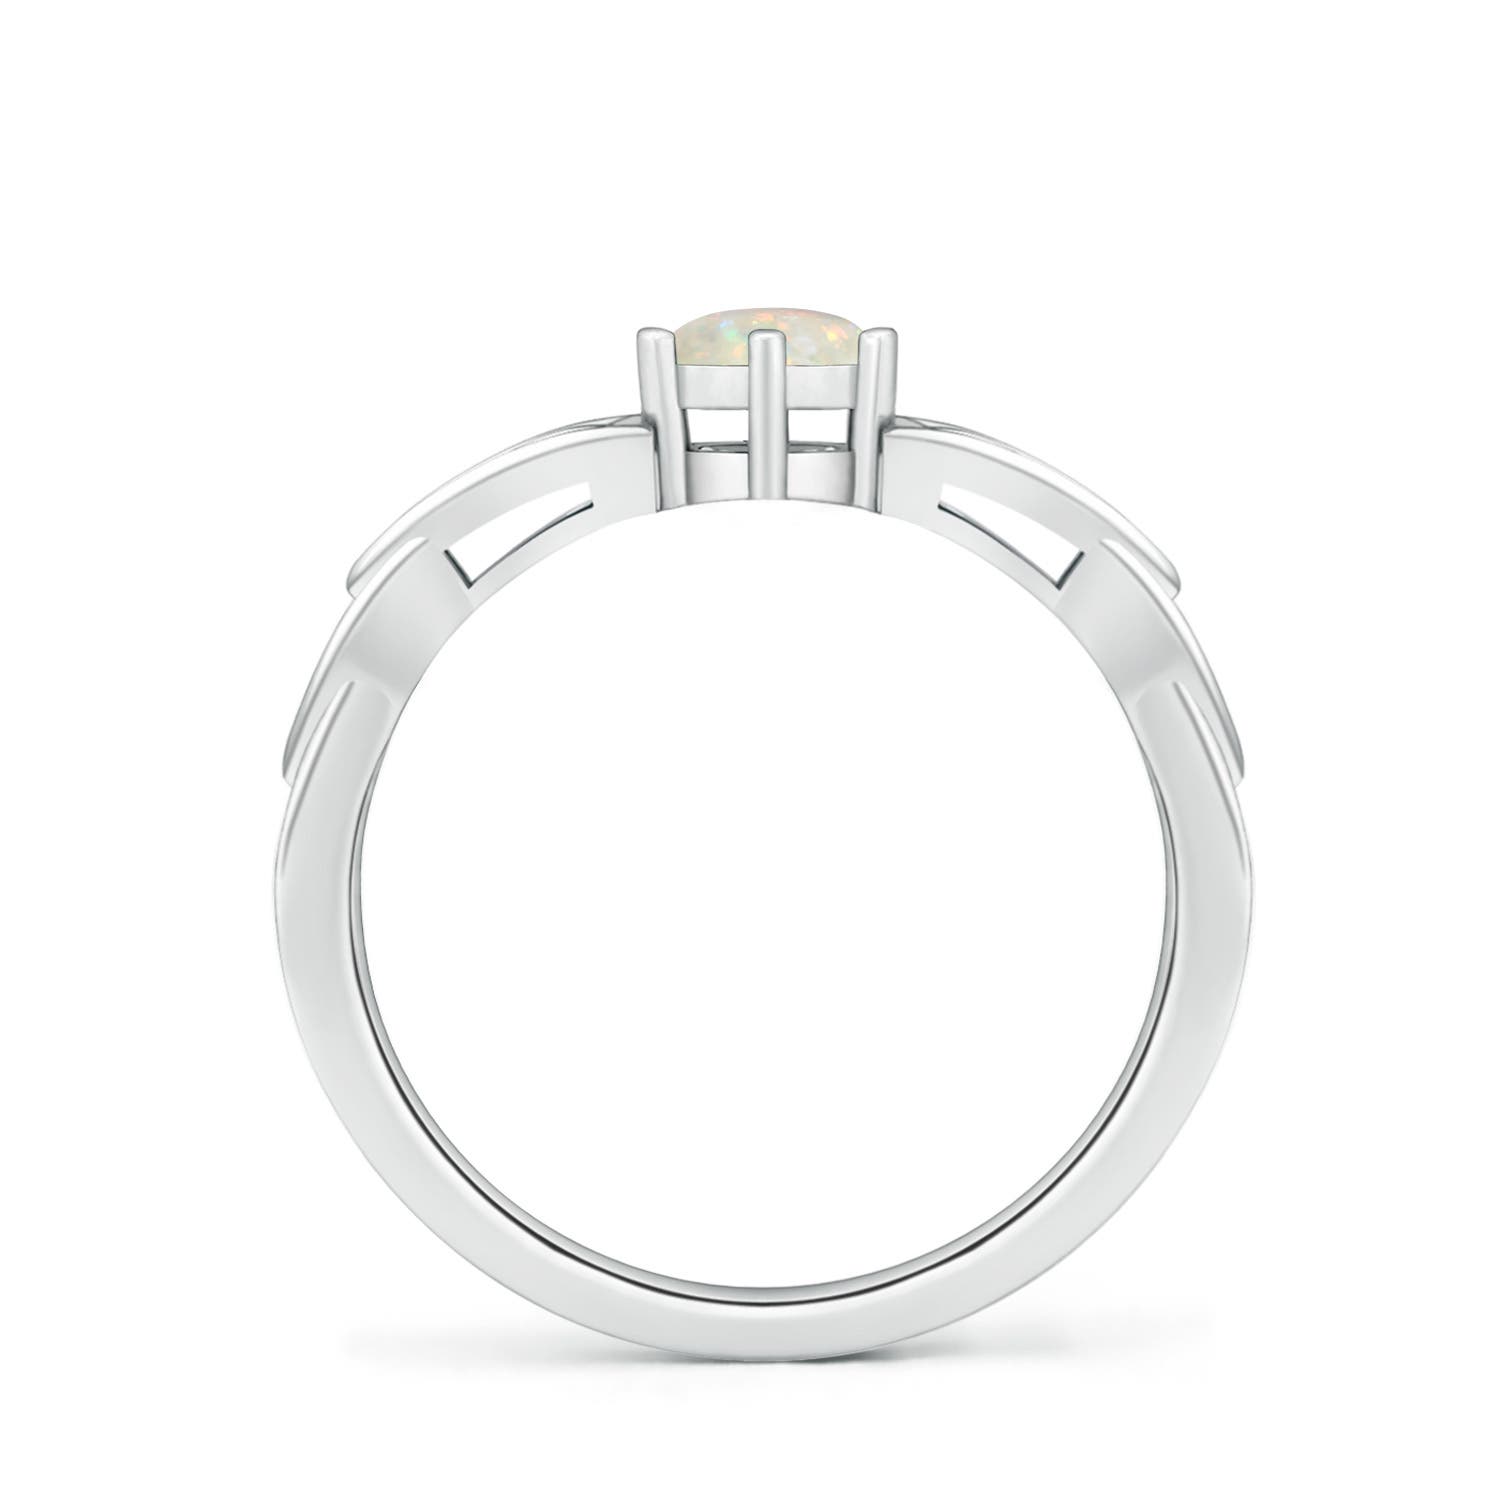 AAA - Opal / 0.33 CT / 14 KT White Gold